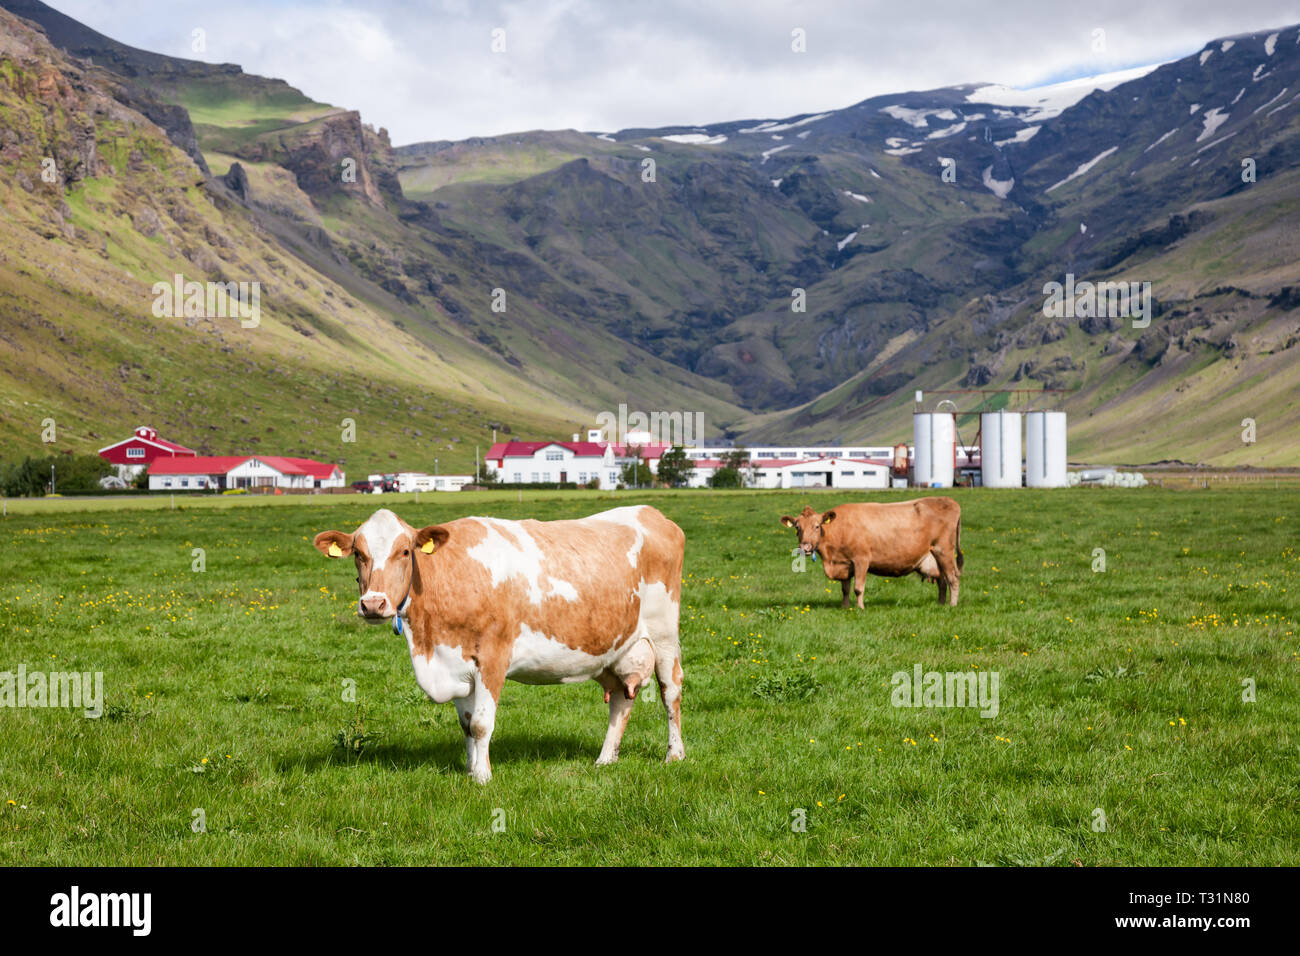 Icelandic rural scene with free range grazing red and white Holstein Friesian breed dairy cattle in a pasture with farm buildings in background, Icela Stock Photo